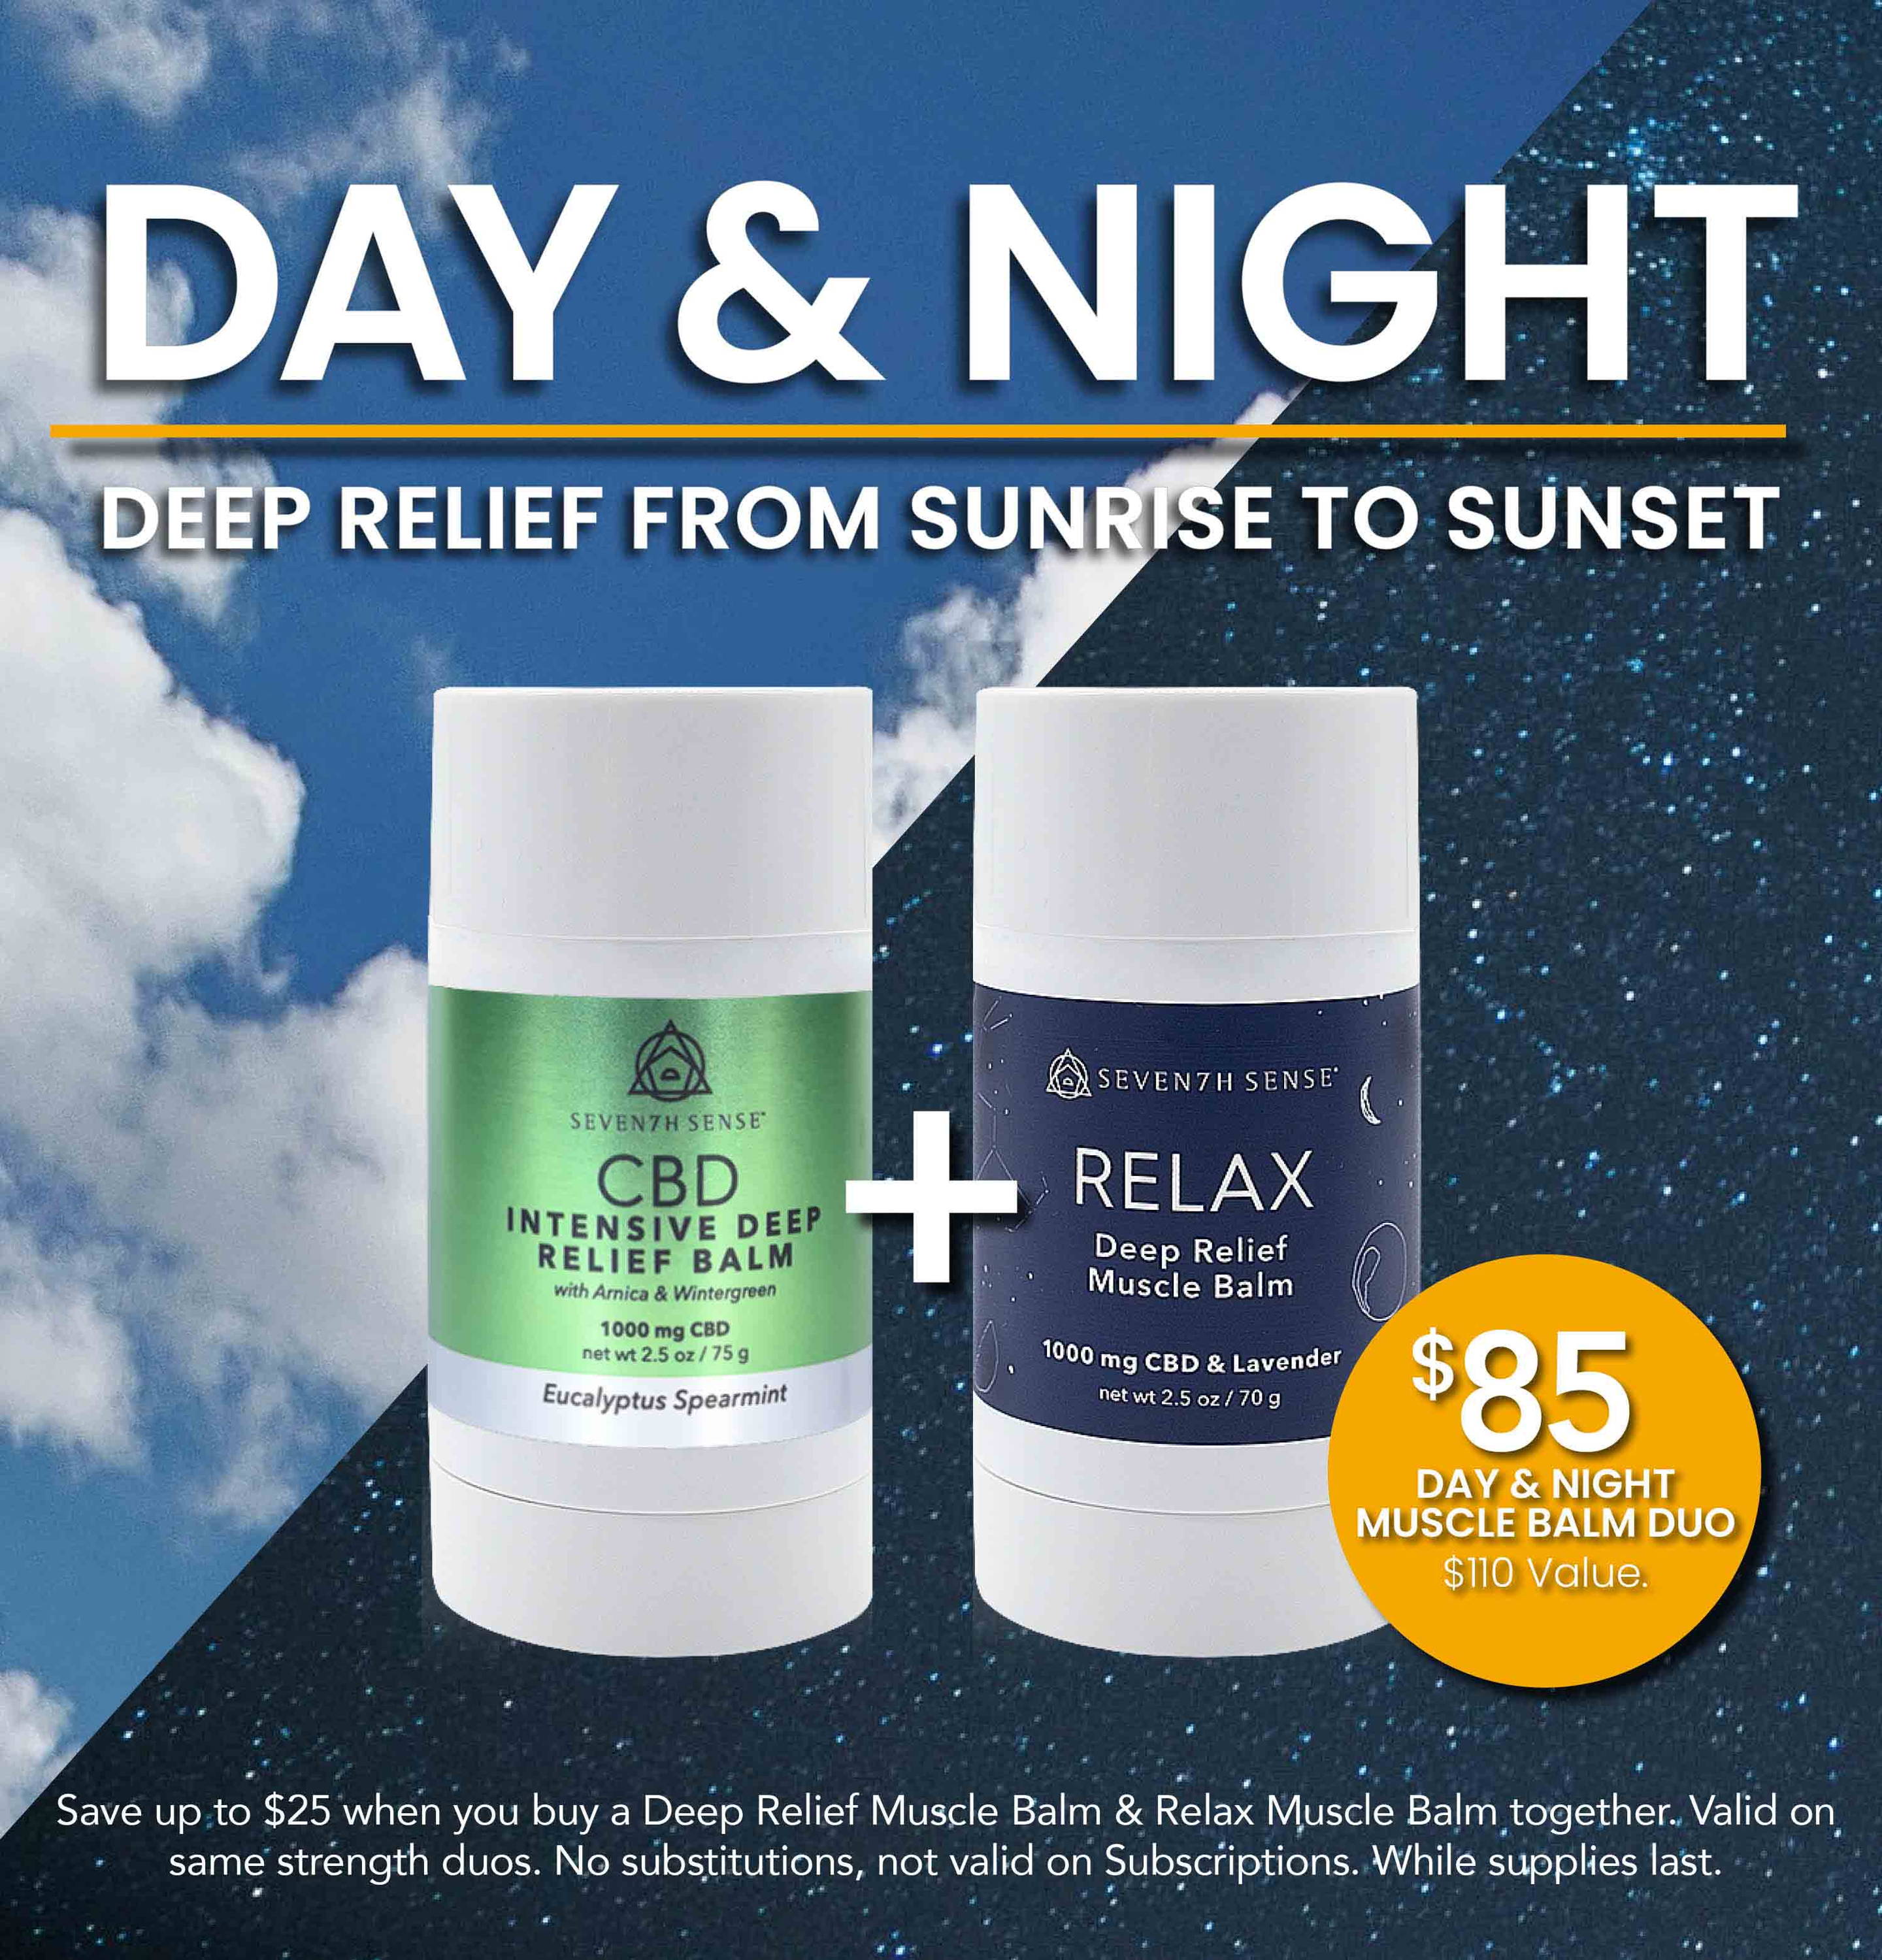 Save up to $25 when you buy a Deep Relief Muscle Balm & Relax Muscle Balm together. Valid on same strength duos. No Substitutions, not valid on Subscriptions. While supplies last.